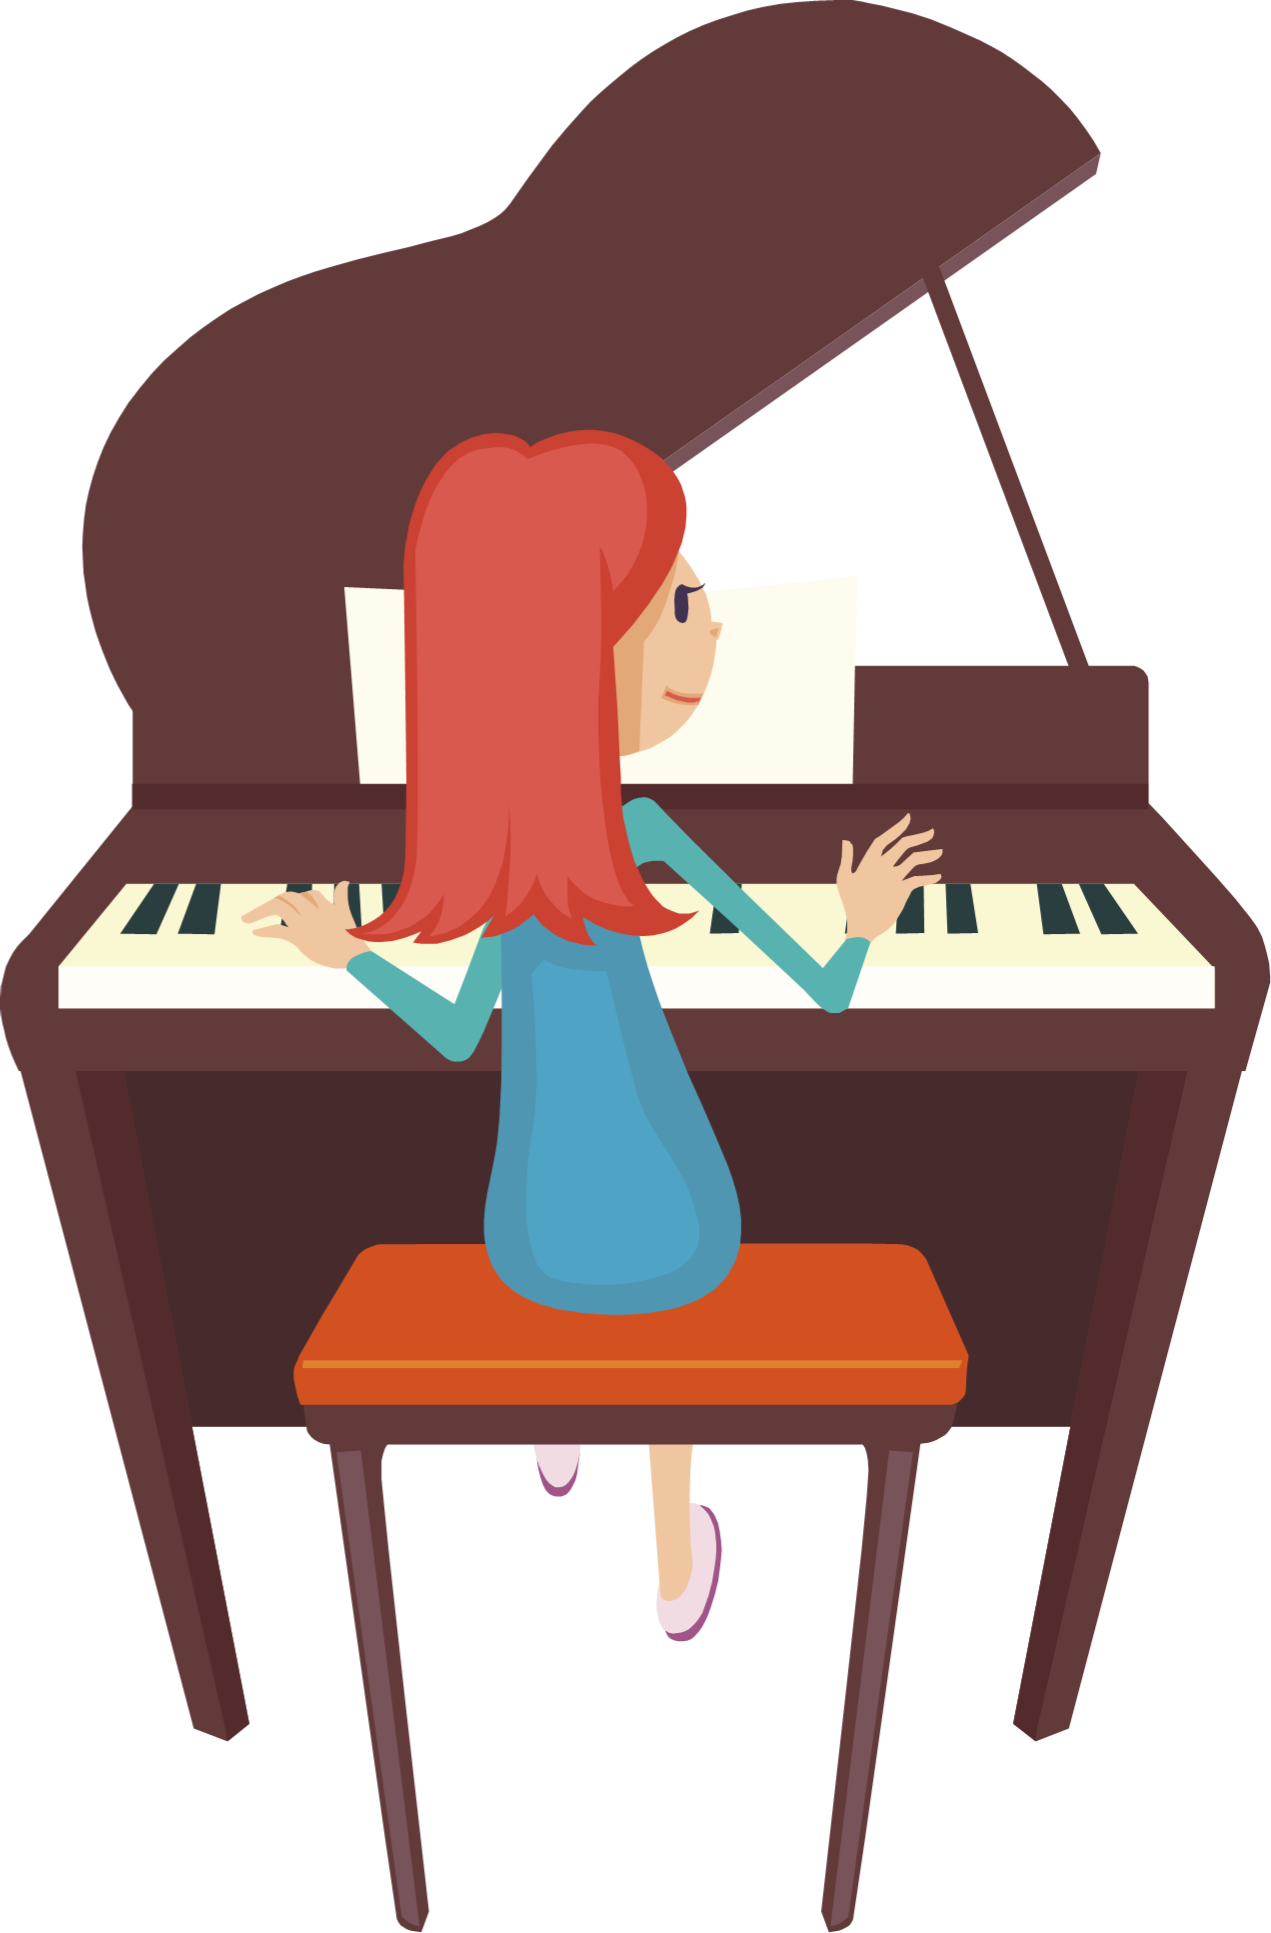 free-cartoon-pictures-of-pianos-download-free-cartoon-pictures-of